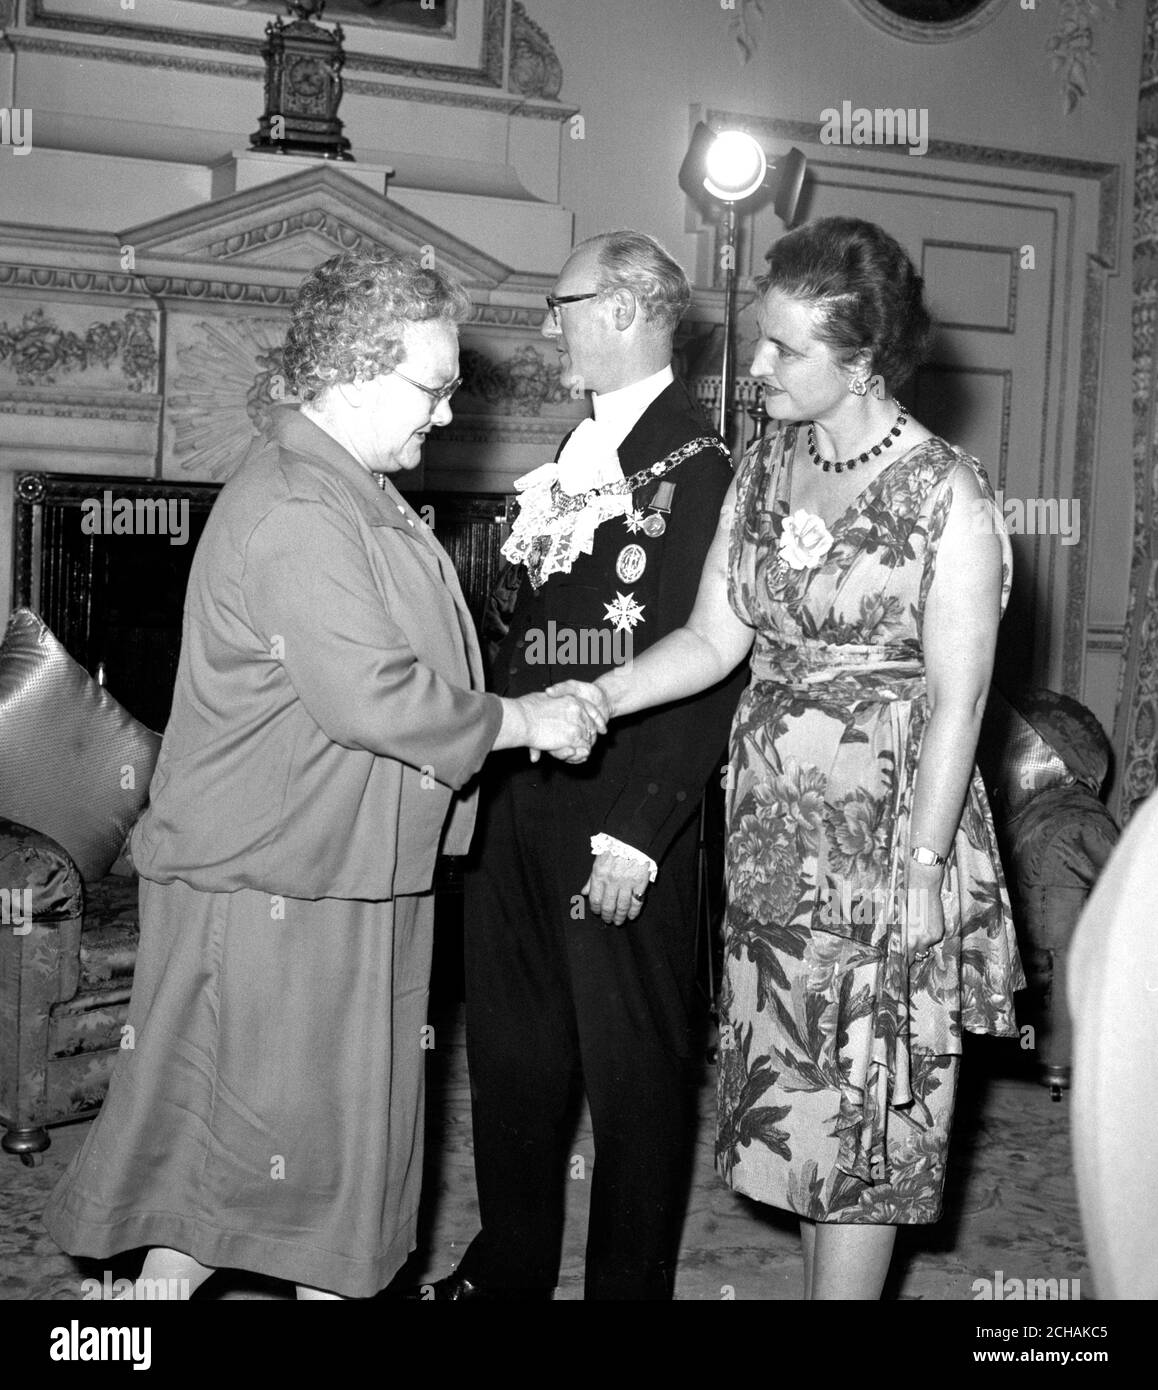 Press Association cleaner Mrs Twigg meets the Lord Mayor of London Sir Frederick Hoare and the Lady Mayoress at a reception for about 400 of the City's female cleaners at Mansion House. The reception, in connection with the City of London Festival, was given by the Lord Mayor and his wife because they felt that some tribute ought to be paid to those who keep the City and its offices clean. Stock Photo